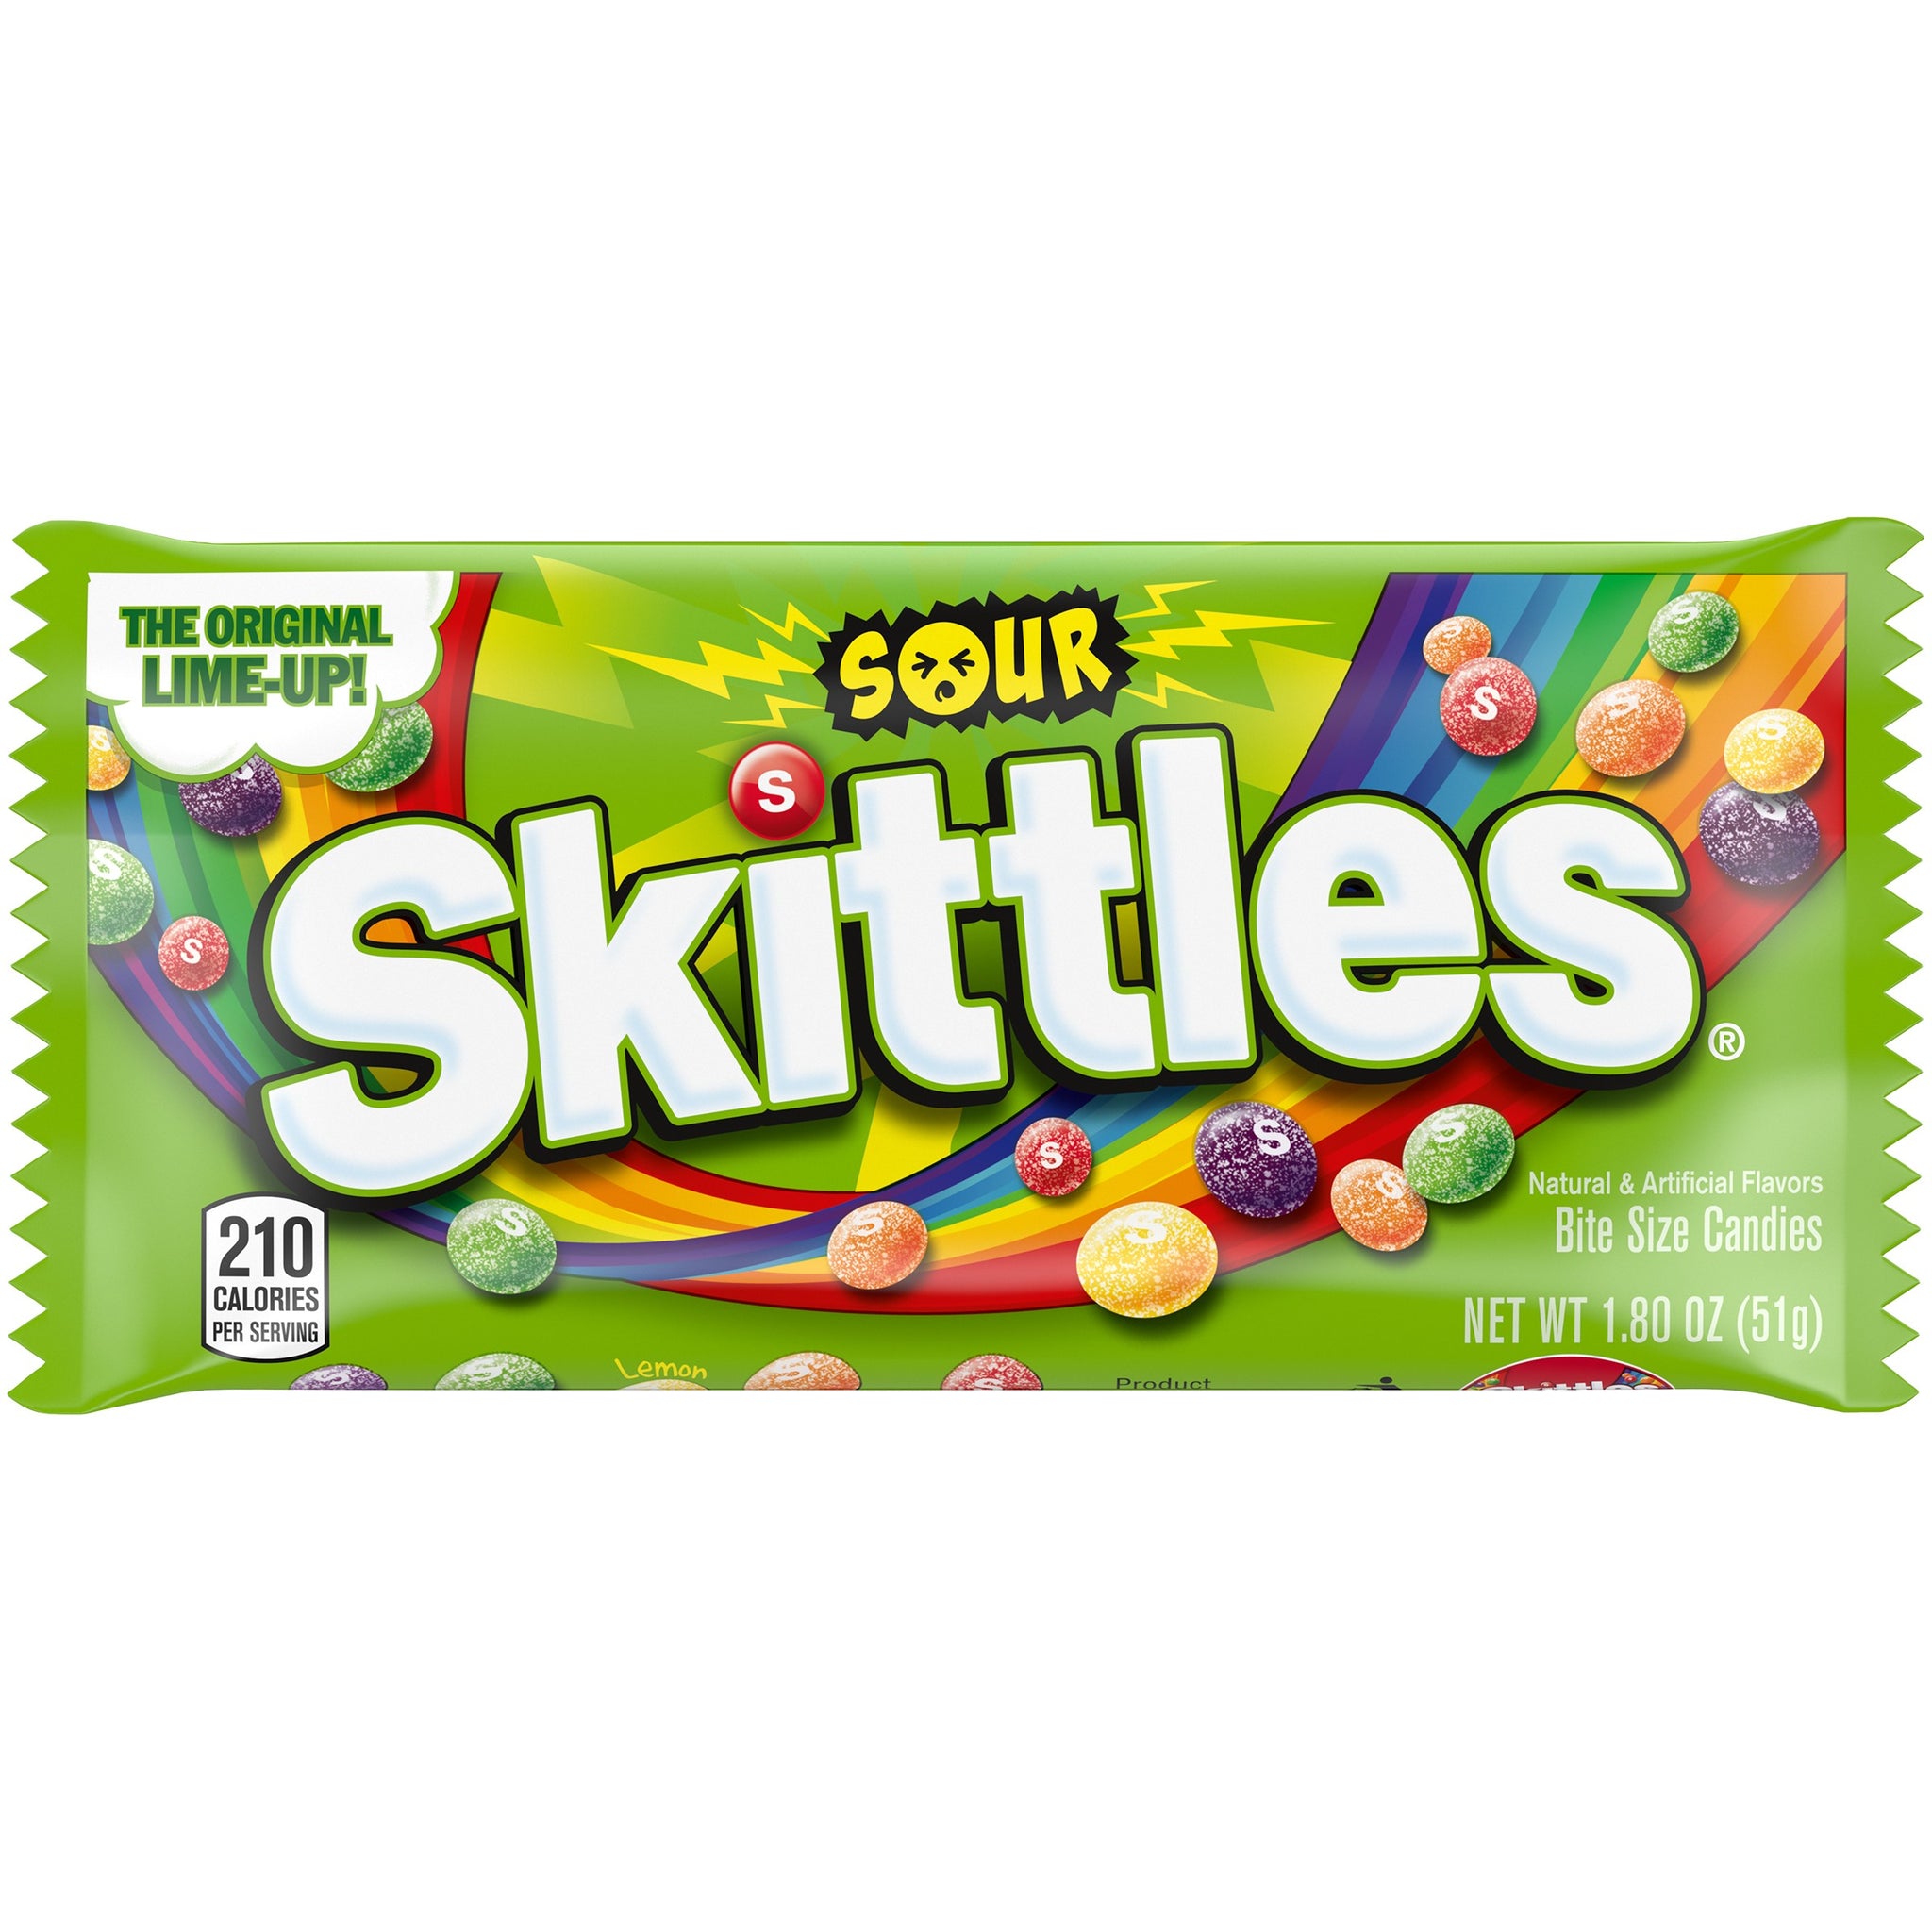 Skittles Candy Lawsuit: Is the U.S. Banning Skittles? | Markets Insider